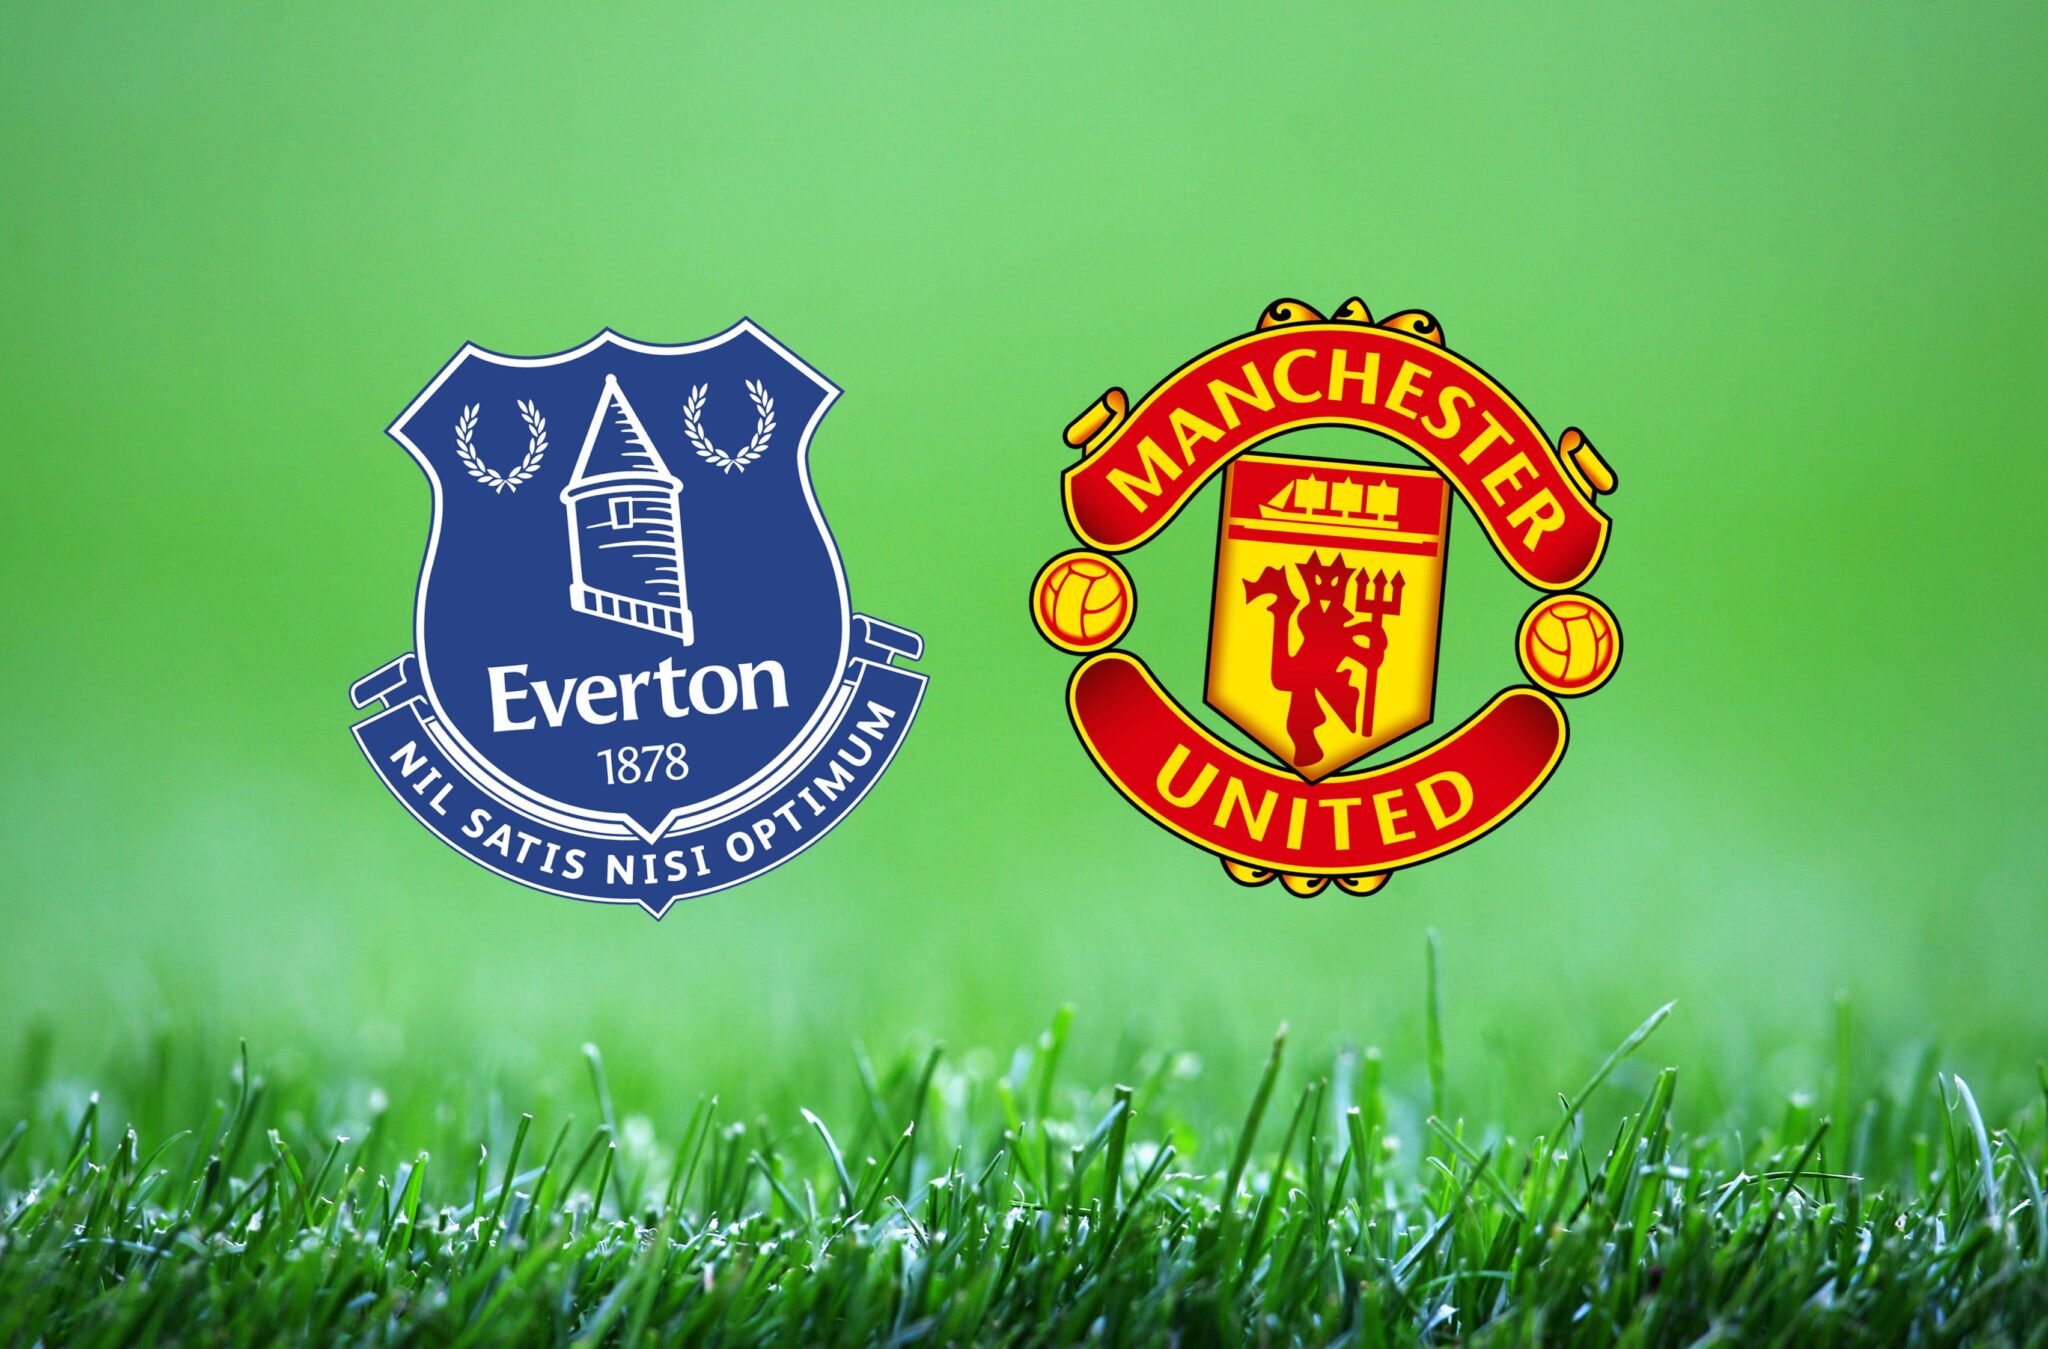 Everton vs Manchester United : Team news, match facts and prediction